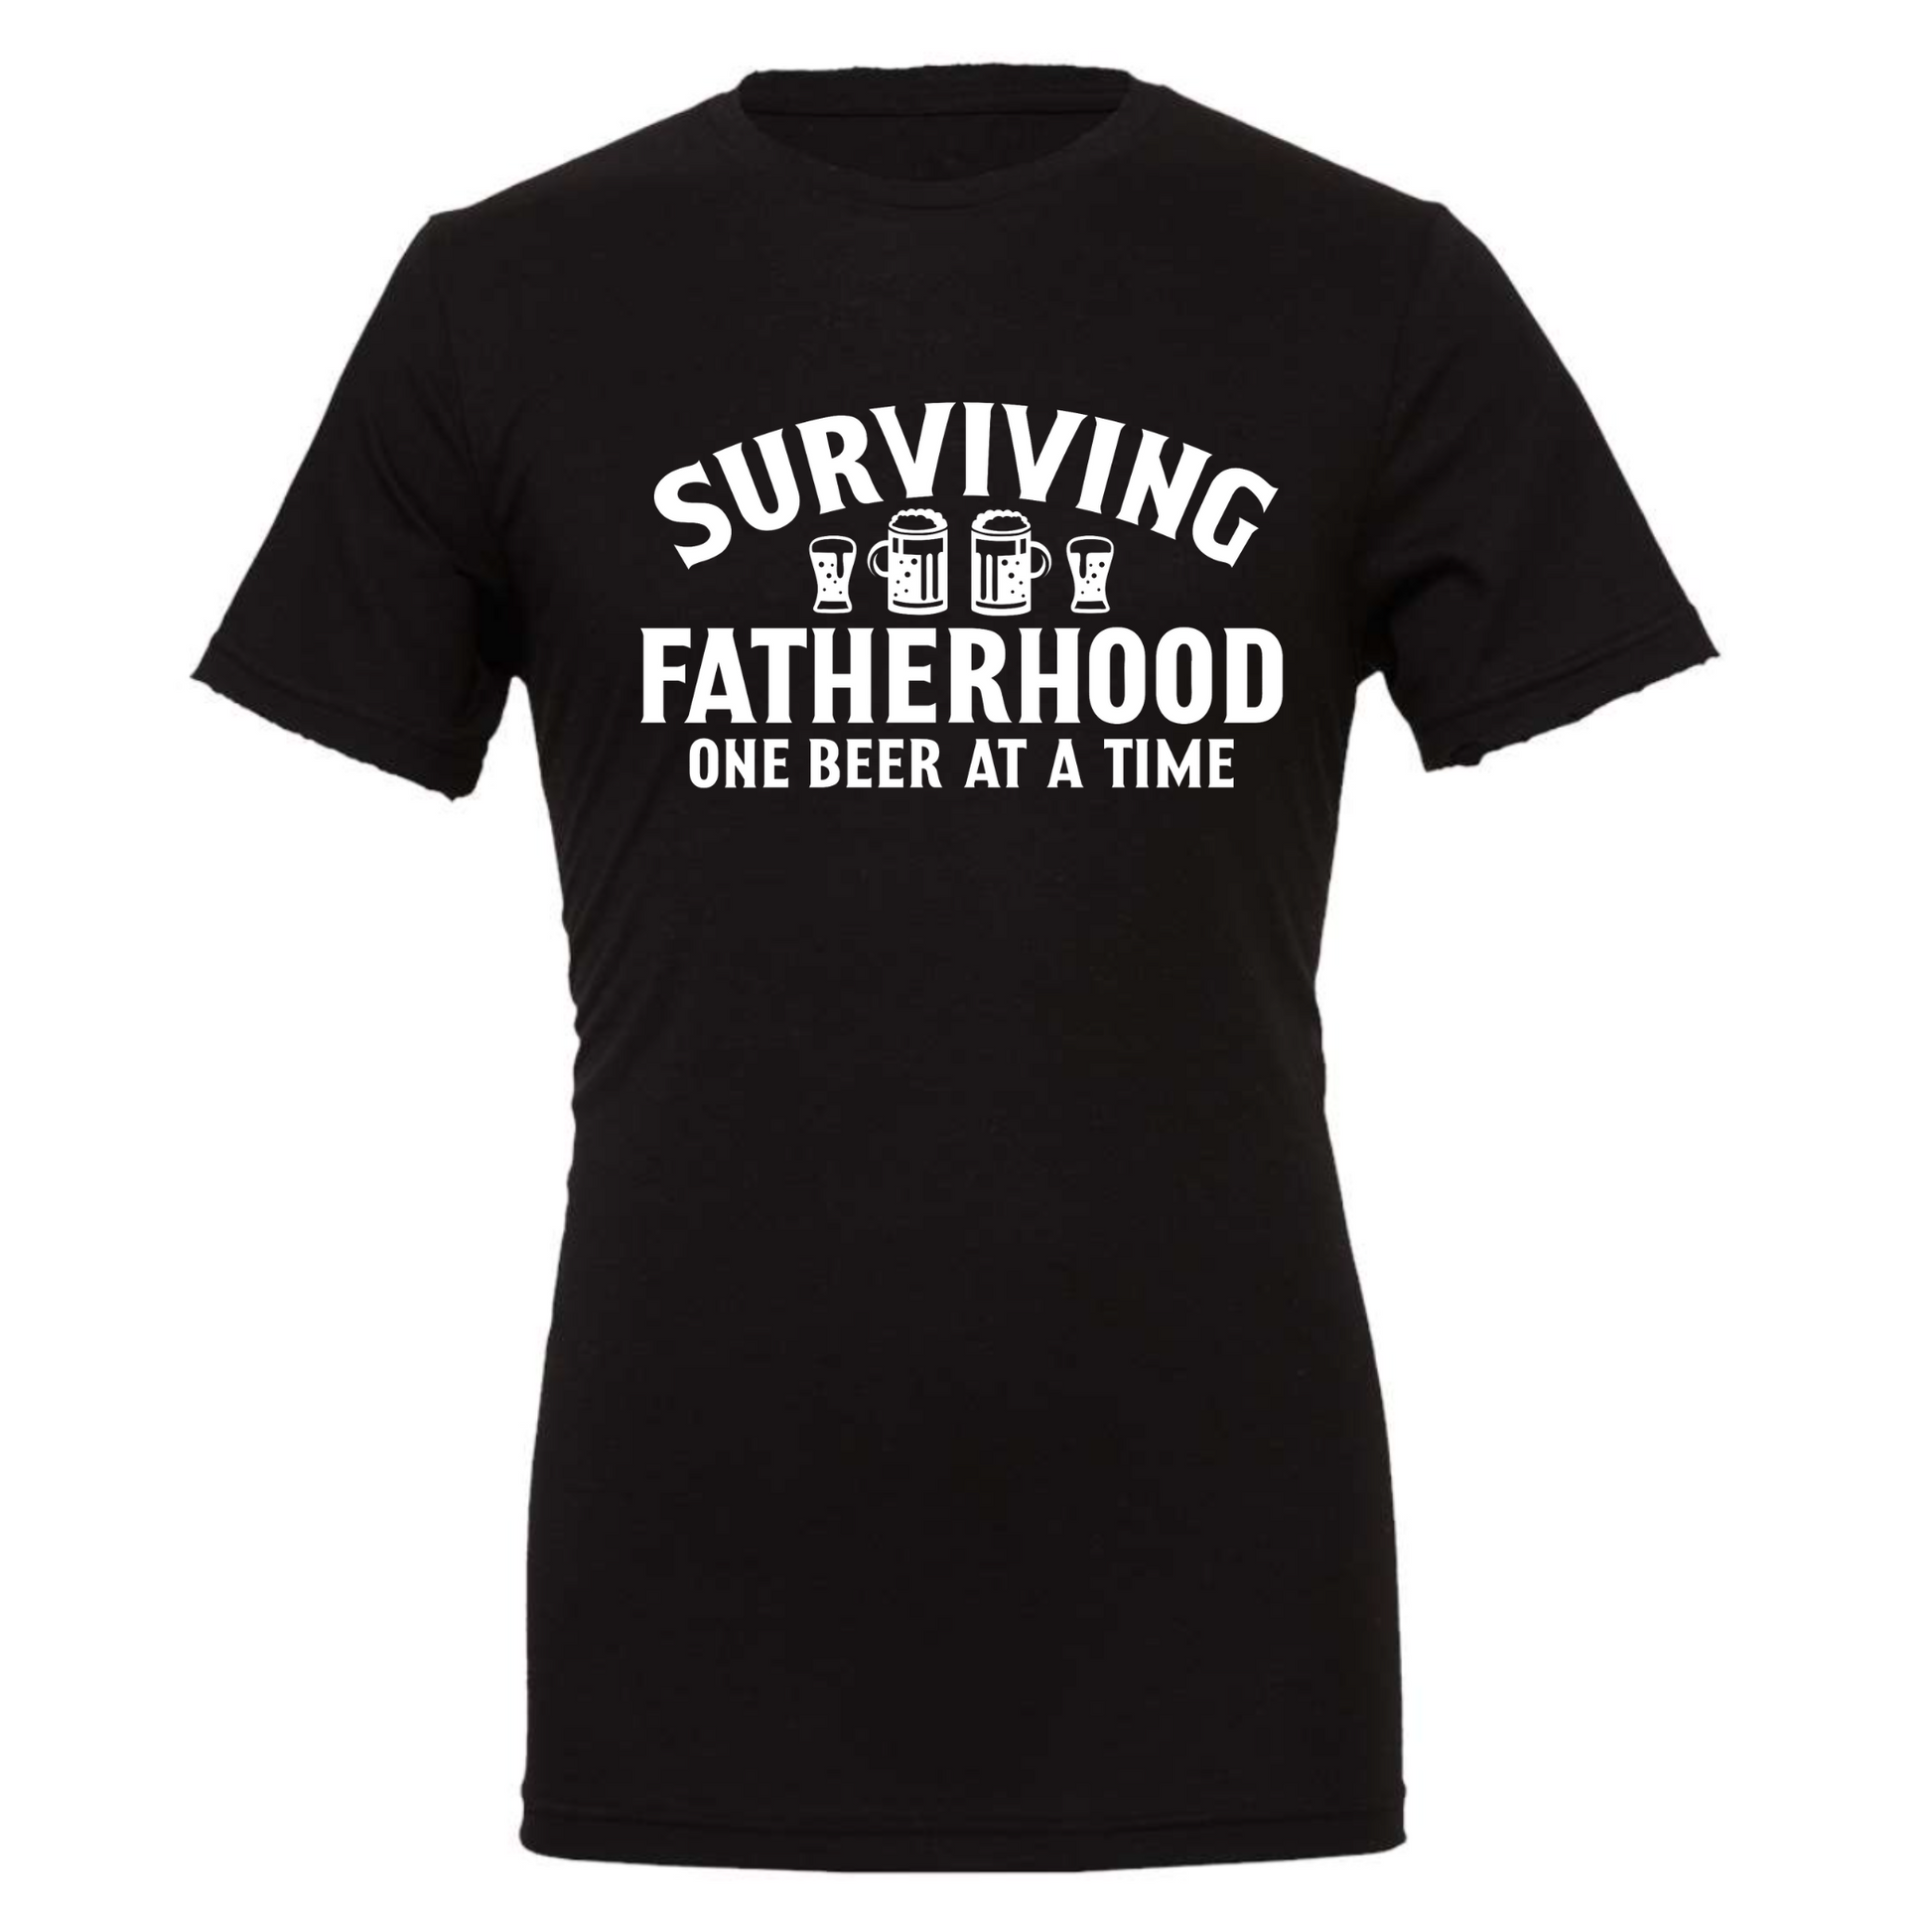 Surviving Fatherhood One Beer At A Time - Black T-Shirt - front view in white writing. Between the word surviving and fatherhood is different glasses of beer mugs. This is the front view of the shirt.